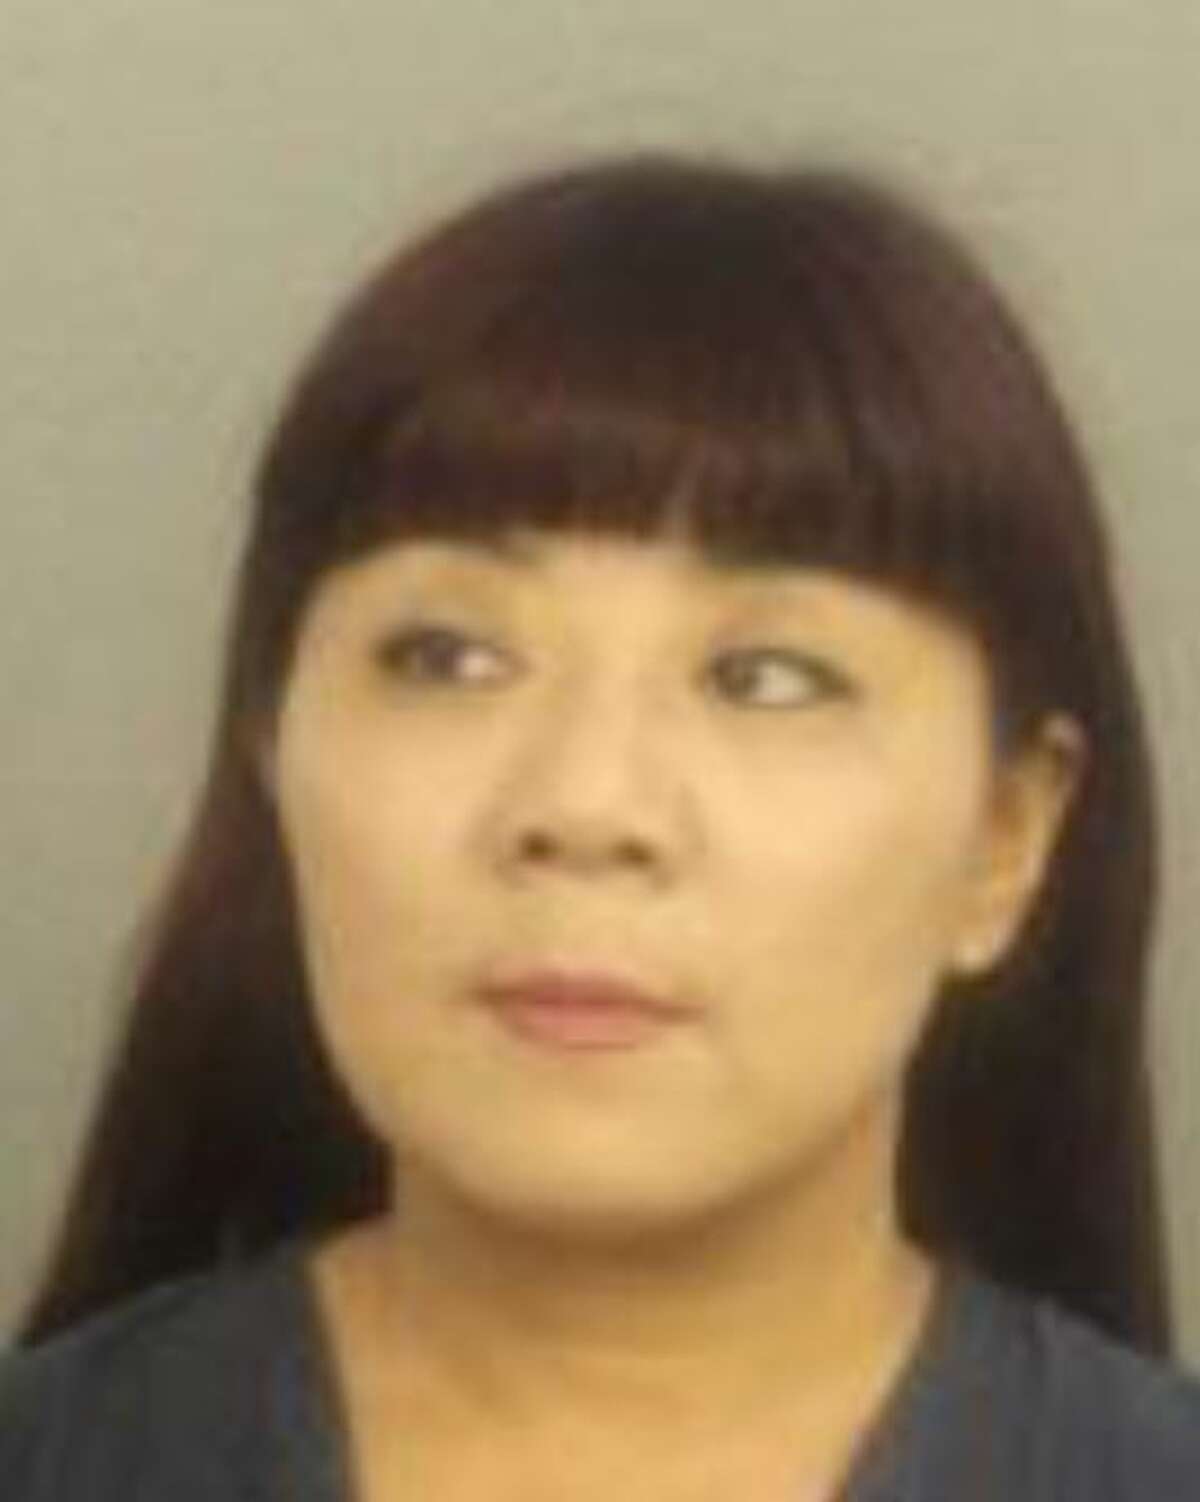 The Hollywood Police Department in Hollywood, Florida arrested Roulan Zhu for soliciting for prostitution, practicing without a license and misrepresenting herself as a licensed masseur at Asian Massage.